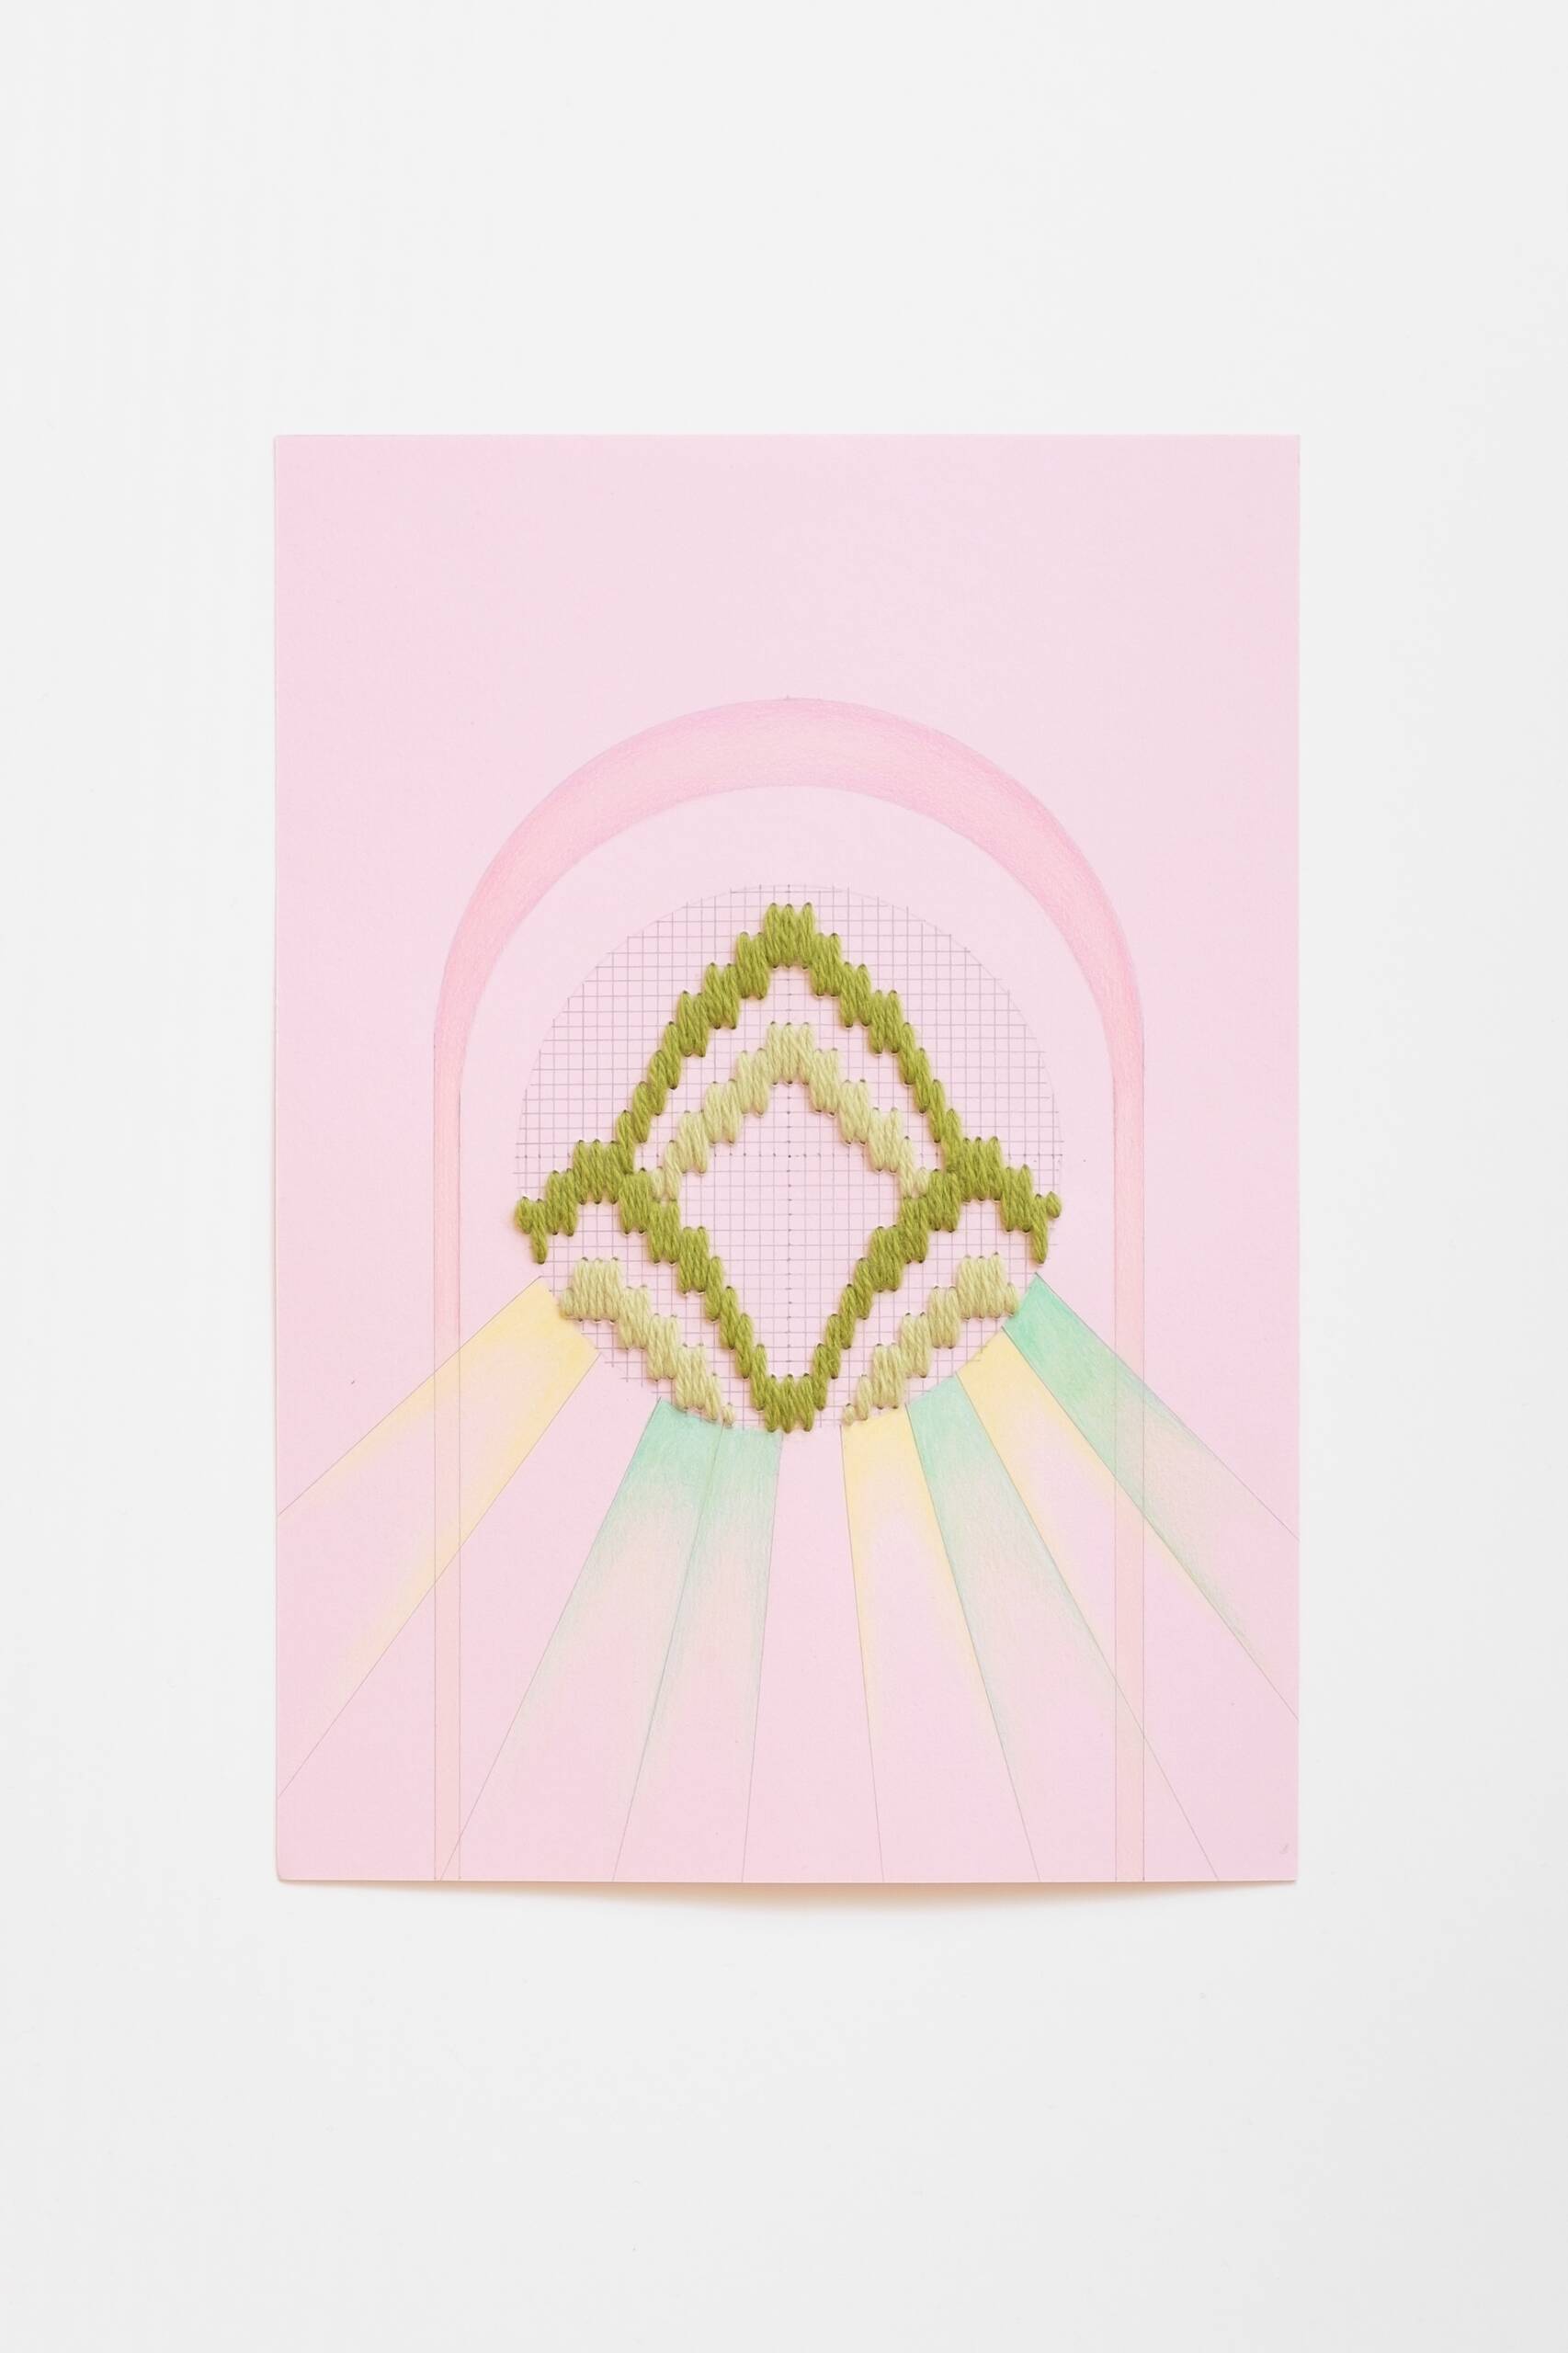 Bargello circle [green on pink], Hand-embroidered wool yarn, pencil and colored pencil on 170 gsm paper, 2021